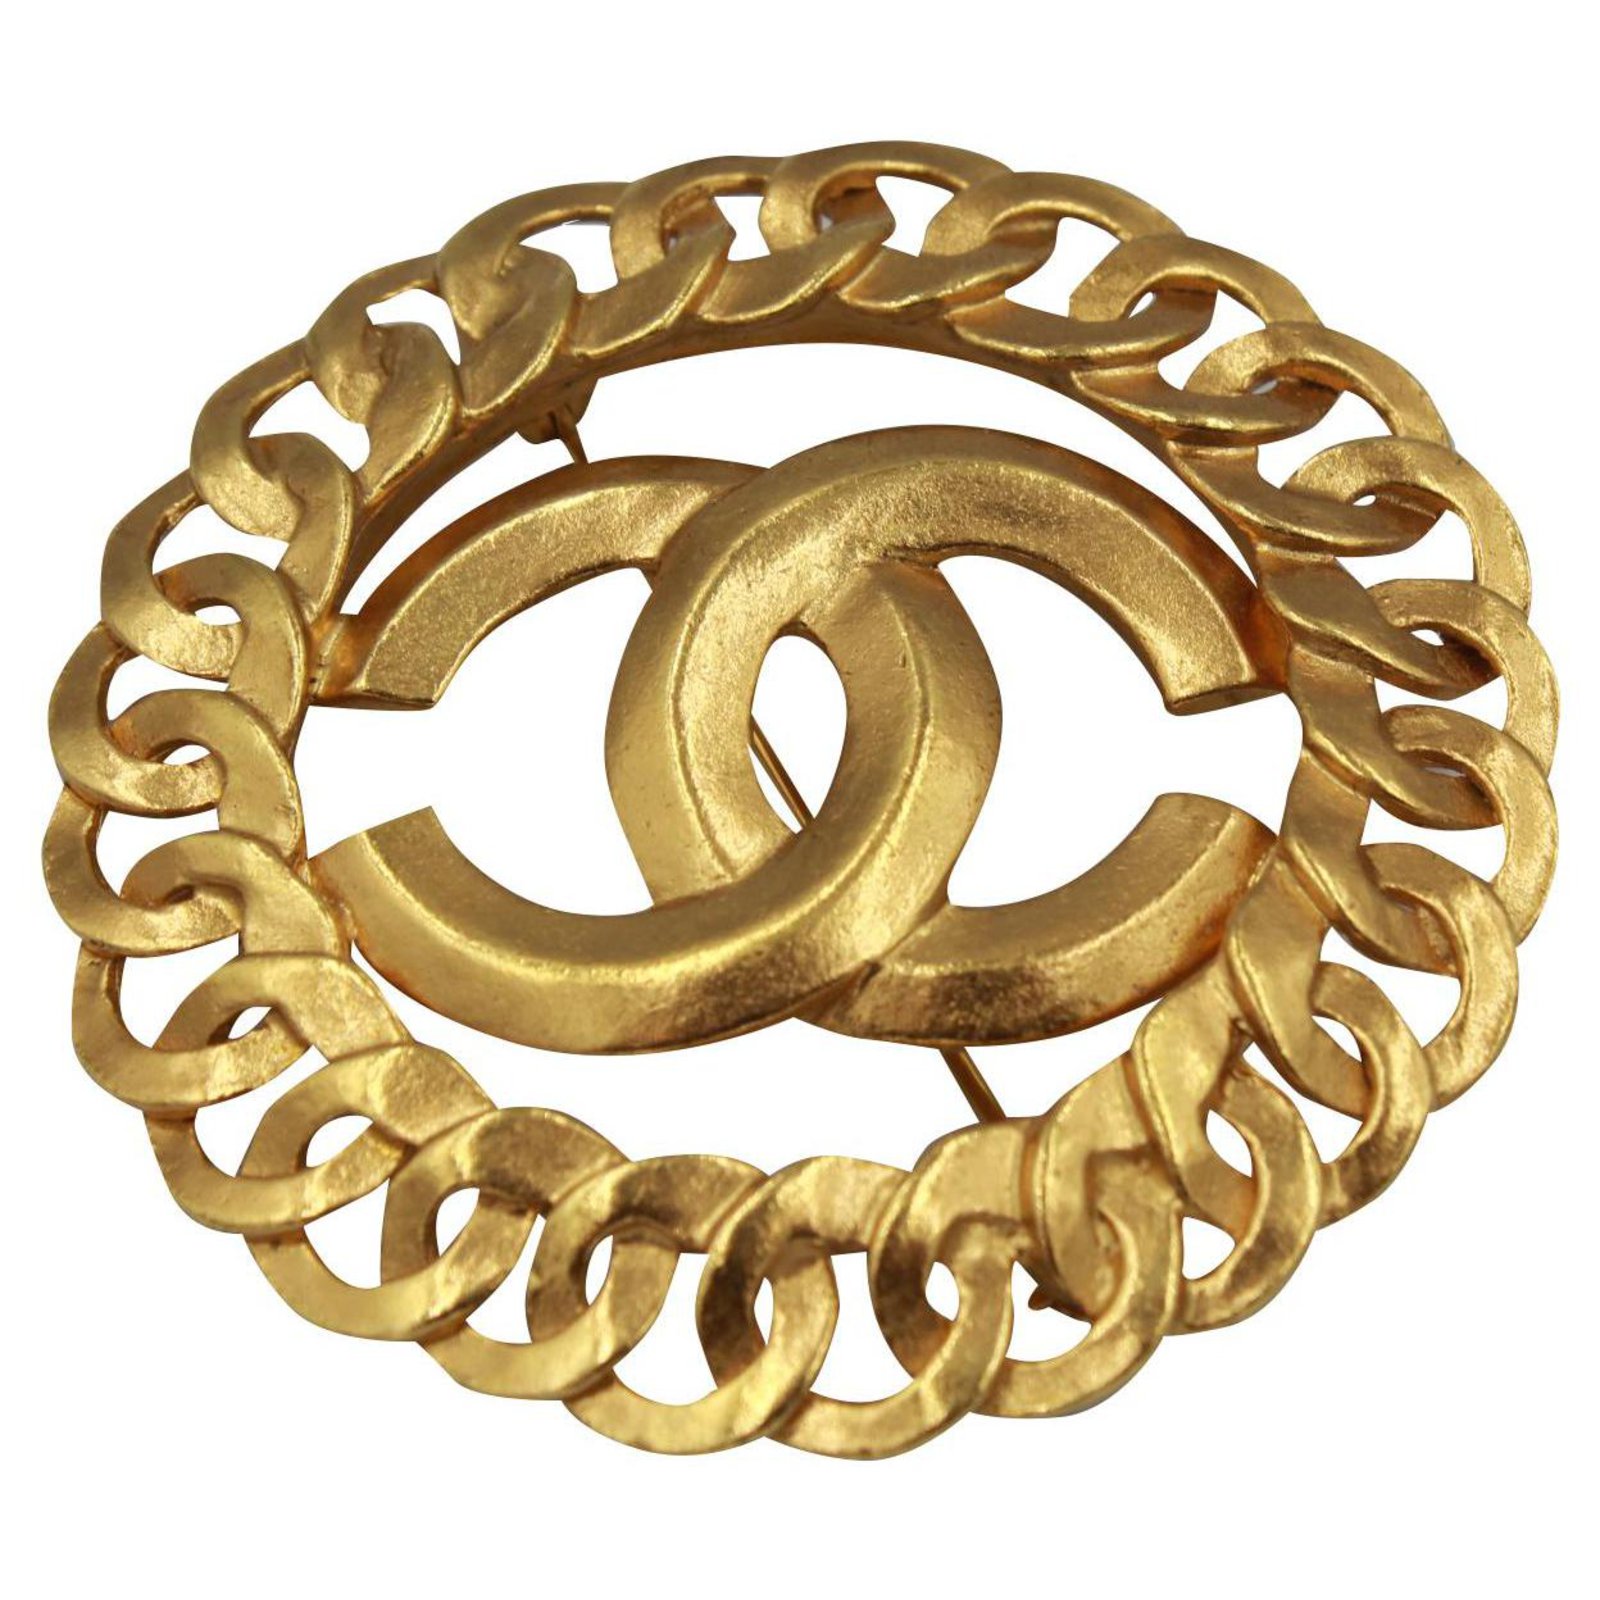 Vintage Chanel broche, double « C » in Gold metal.